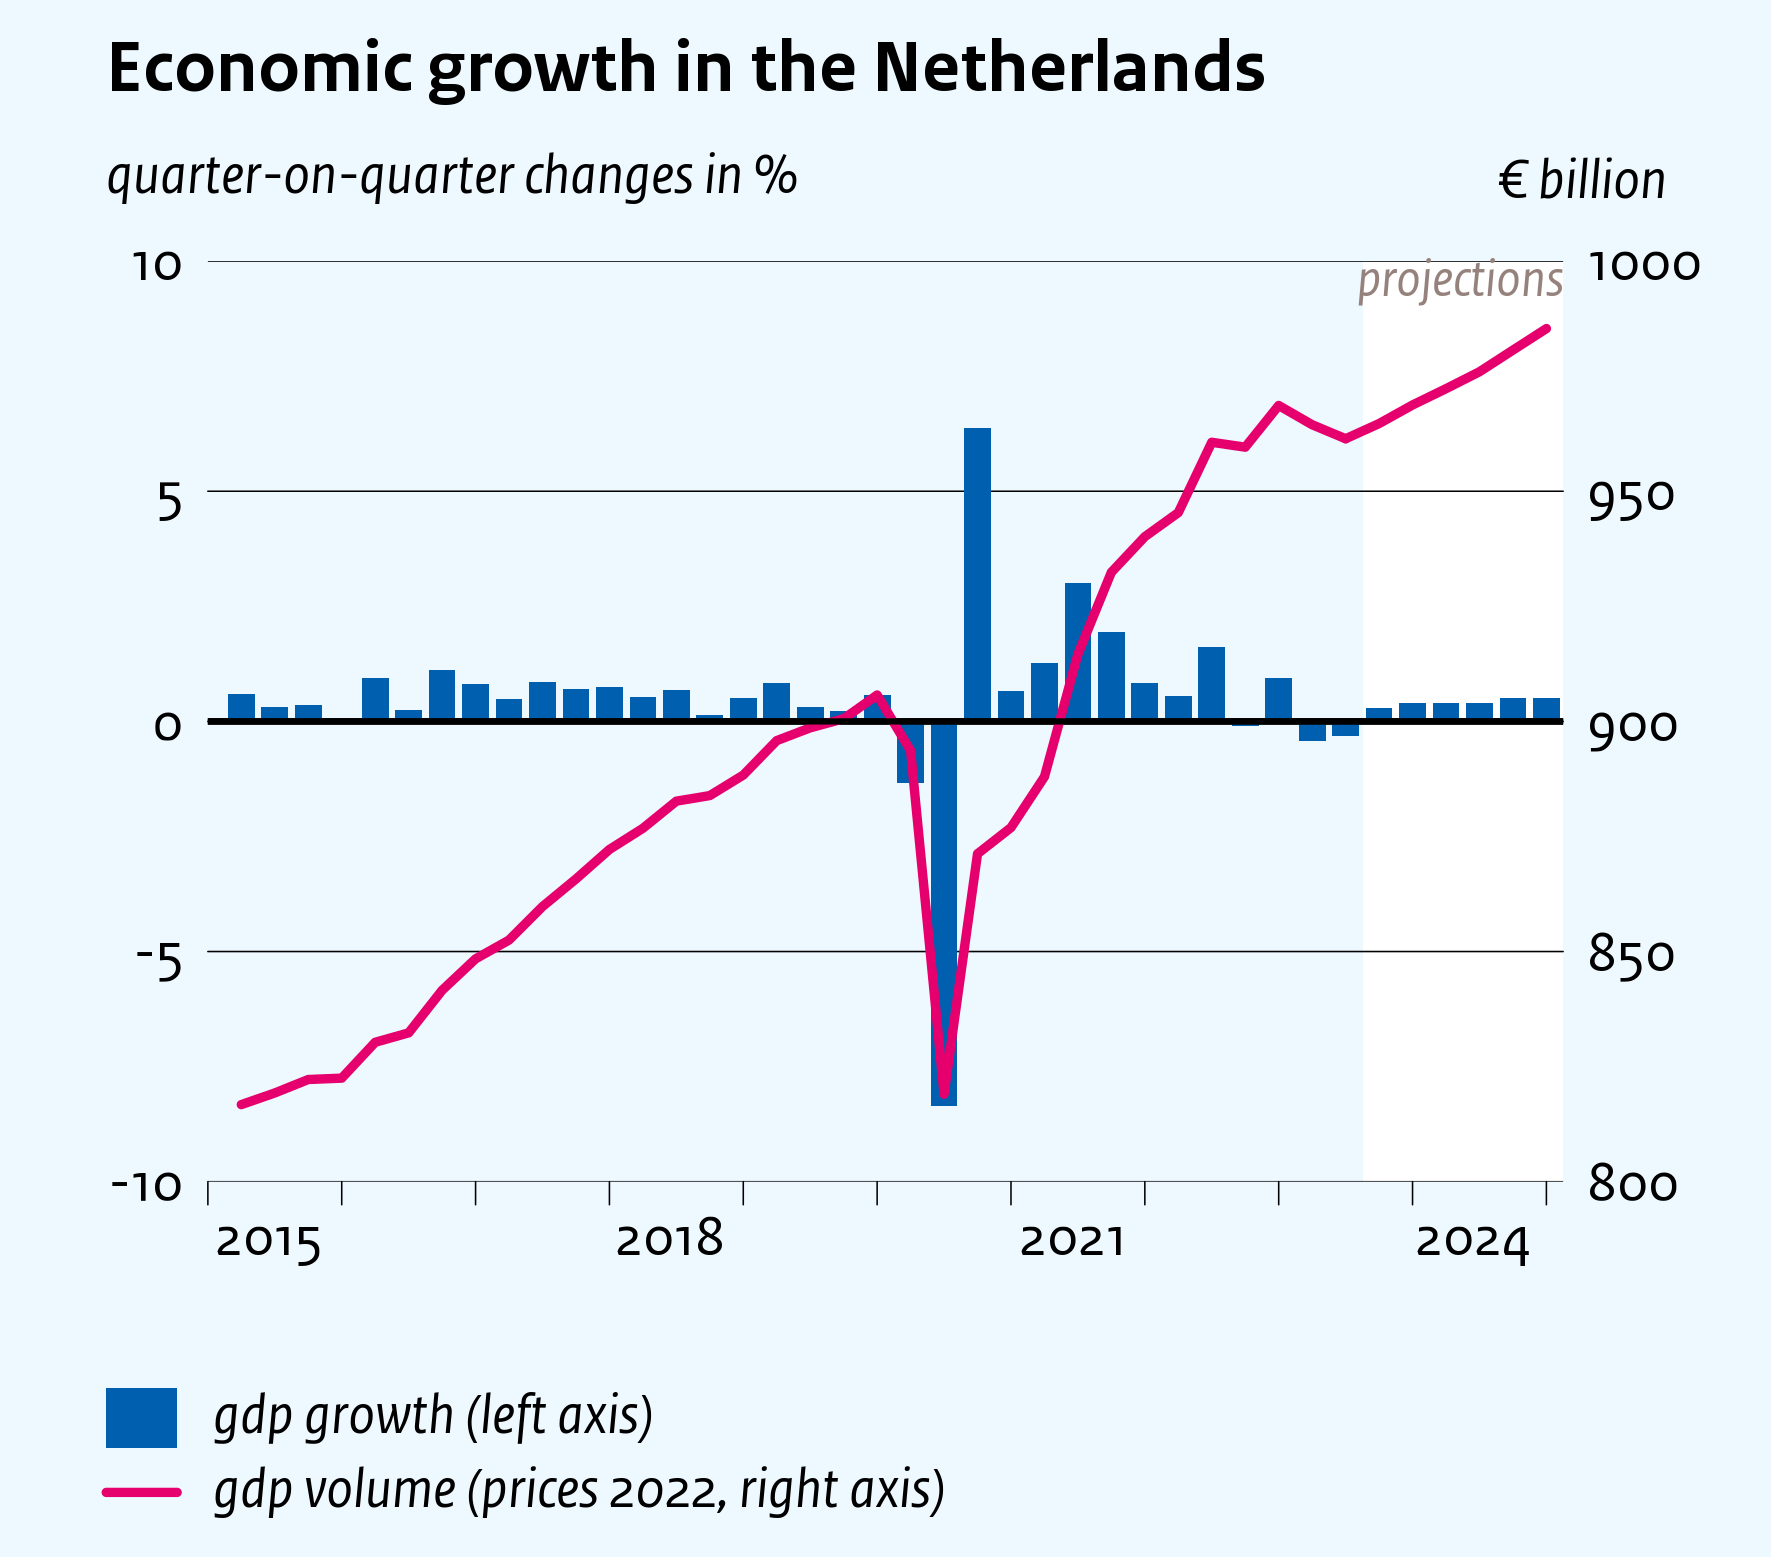 Economic growth in the Netherlands